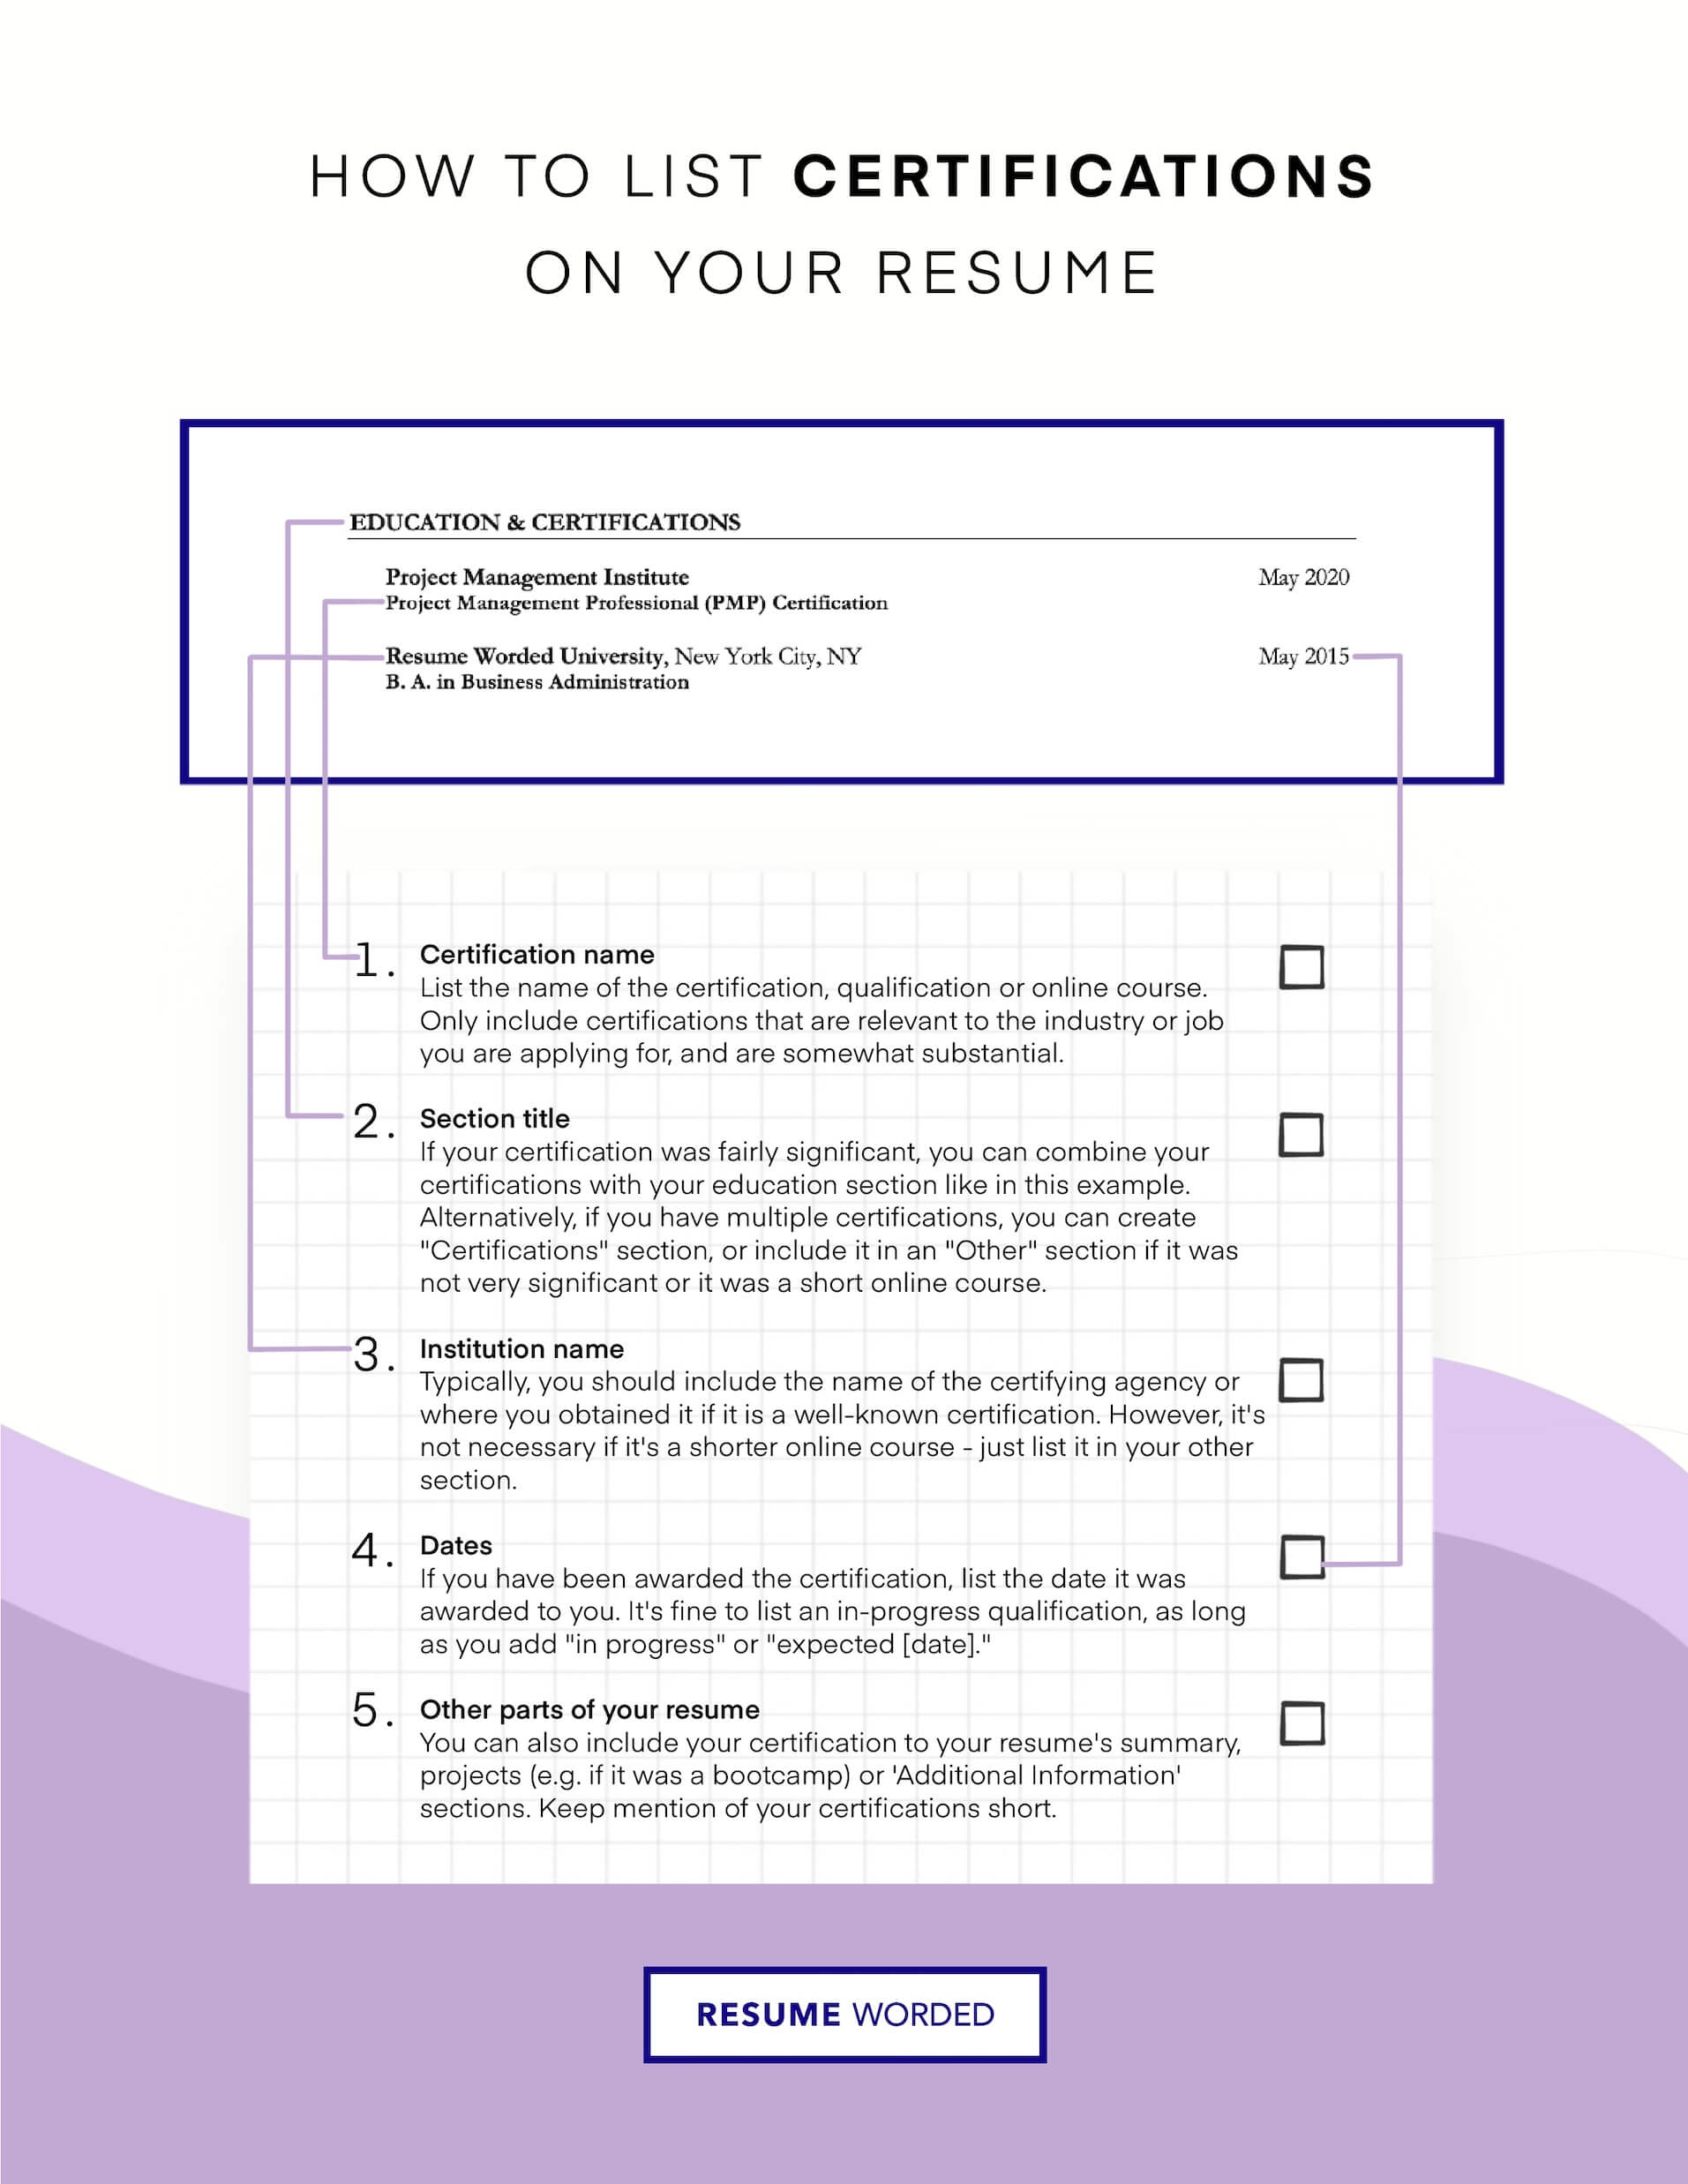 Include professional certification and courses in place of a bachelor’s degree. - Experienced Data Analyst Resume